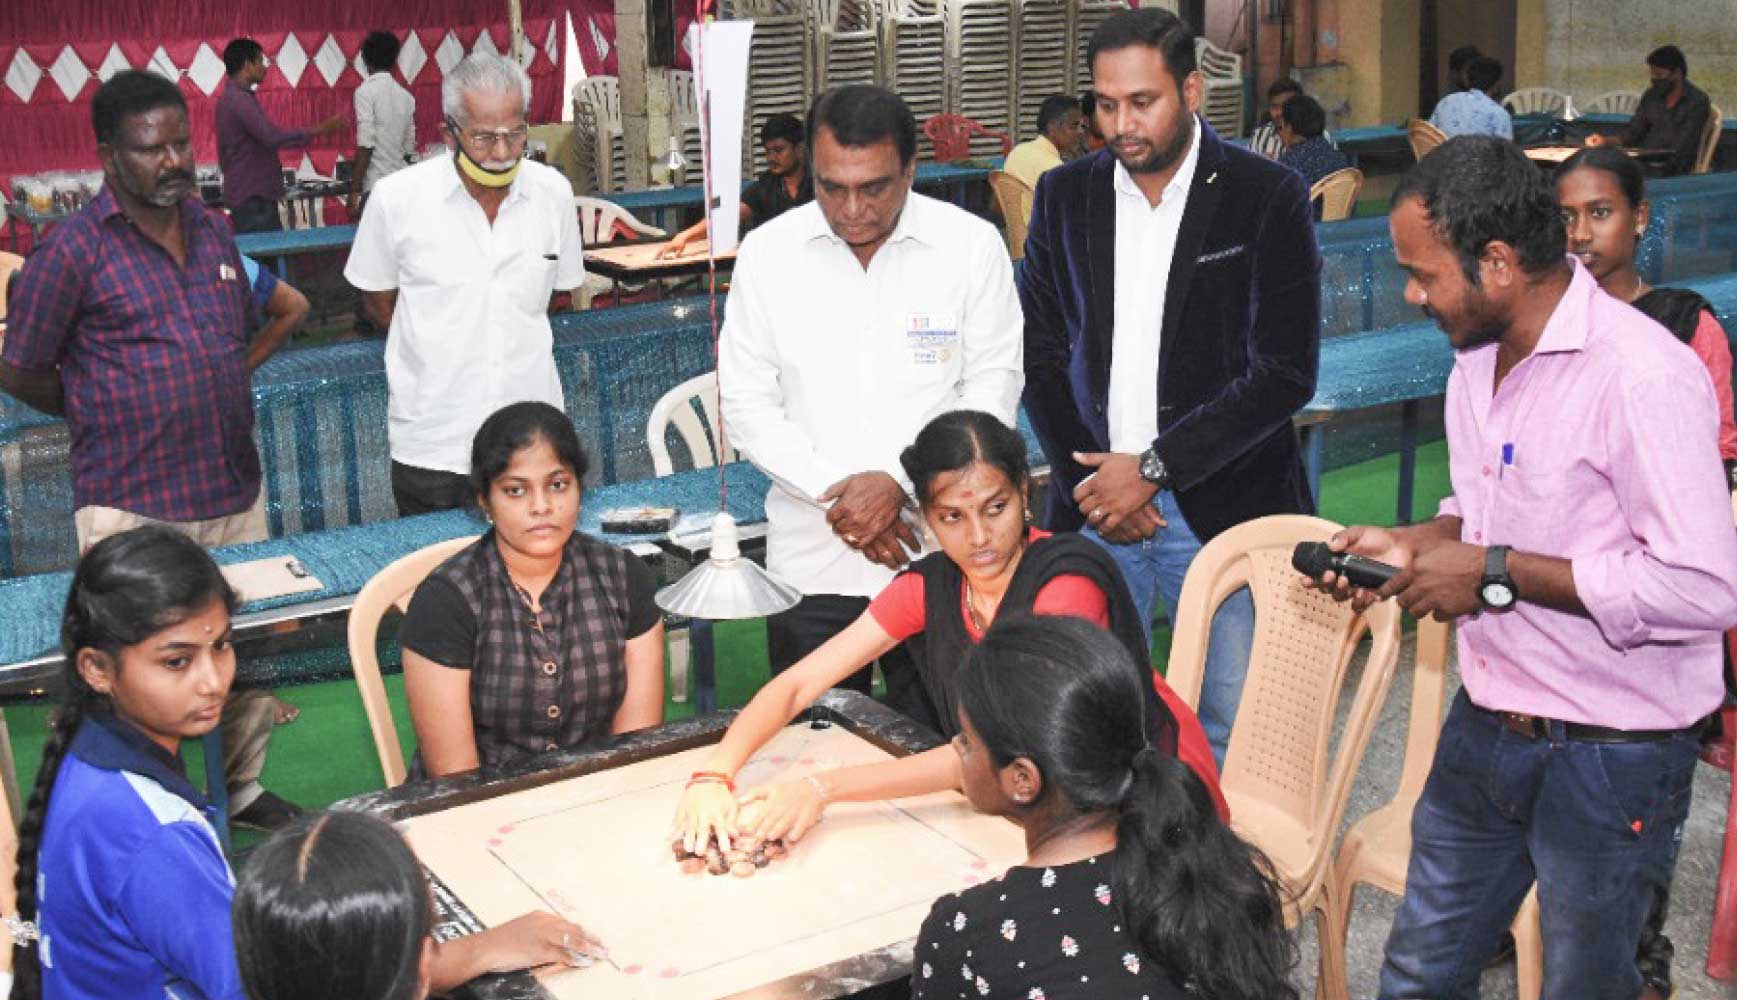 A state-level carrom tournament in progress. Past president Sabarish (2nd from R) looks on.